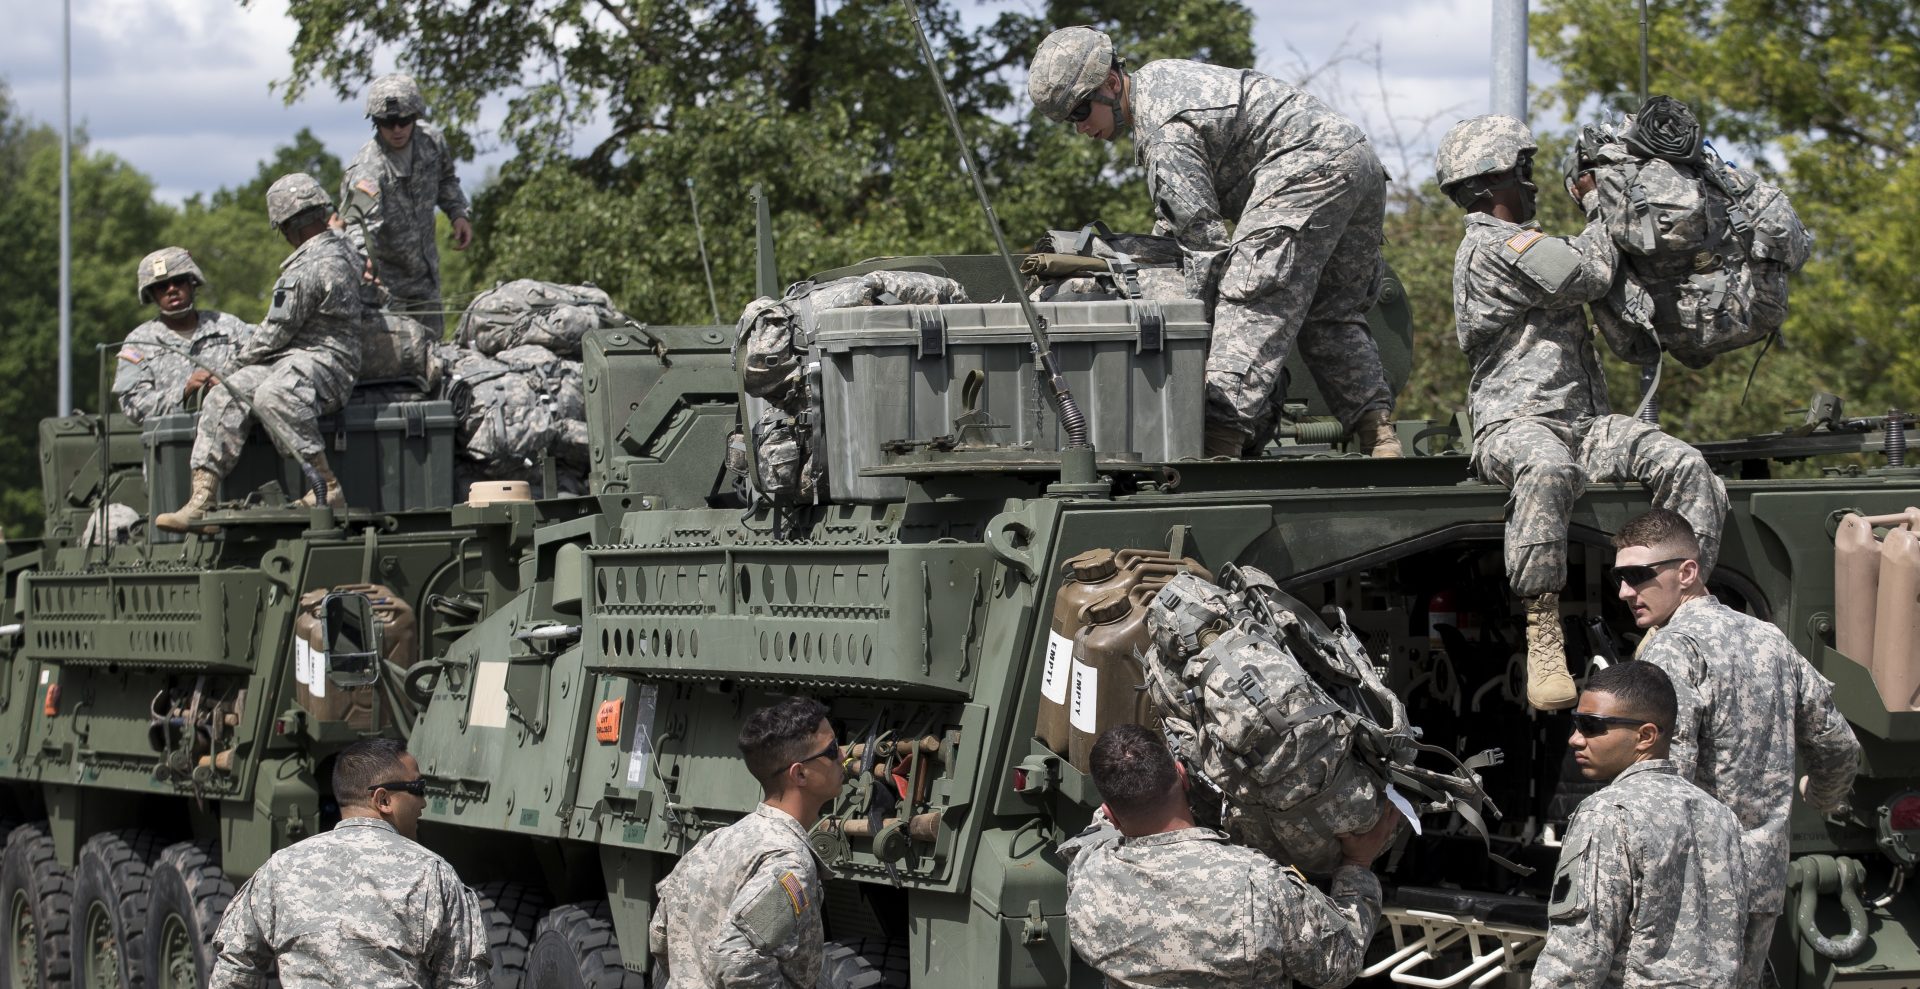 FILE PHOTO: Members of the U.S. Army of the Pennsylvania National Guard unload equipment as they arrive at a airport in Vilnius, Lithuania, Sunday, June 5, 2016.